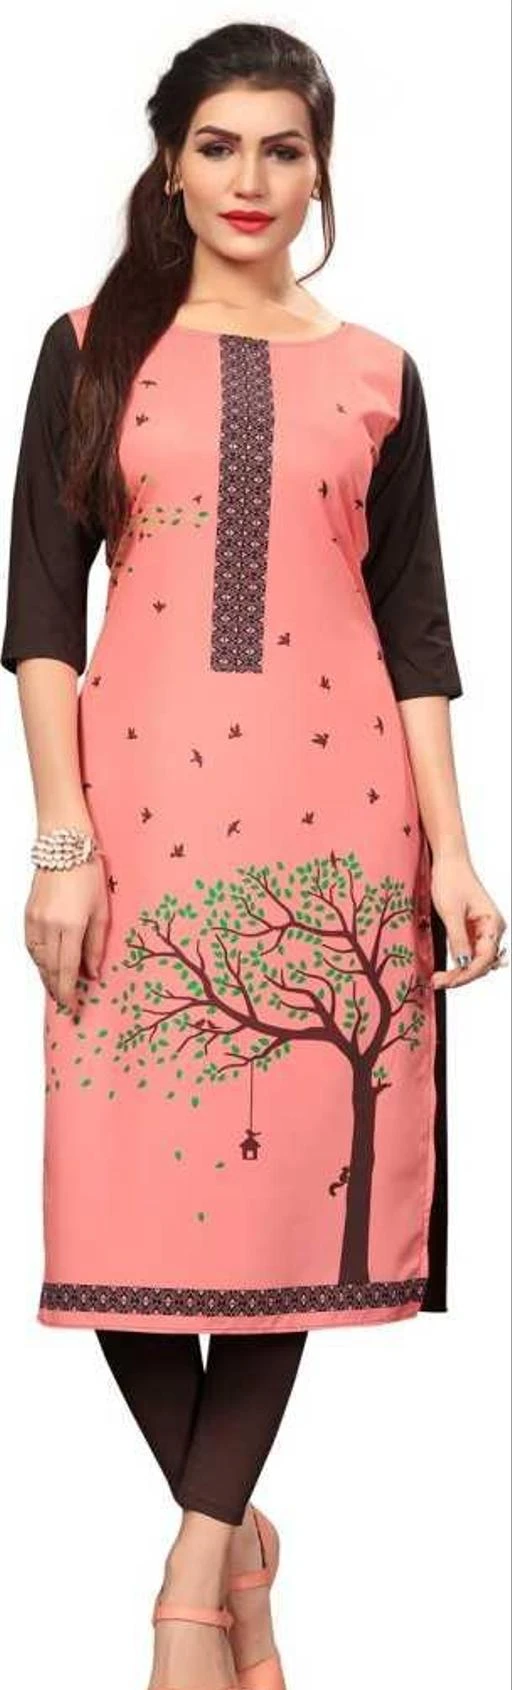 Checkout this latest Kurtis
Product Name: *Abhisarika Alluring Kurtis*
Fabric: Crepe
Sleeve Length: Three-Quarter Sleeves
Pattern: Printed
Combo of: Single
Sizes:
M
New Crepe Digital Printed Round Neck Beautiful A-line straight kurti For Girls and Women . We offers you to attract compliments by this attractive stitched Dress made with fine quality material and Beautiful fabric and straight long which can be Wear for functions, festivals, parties and even office also.
Country of Origin: India
Easy Returns Available In Case Of Any Issue


SKU: KD-6522
Supplier Name: K D-1ENTERPRISE

Code: 852-46705637-992

Catalog Name: Abhisarika Fabulous Kurtis
CatalogID_11497625
M03-C03-SC1001